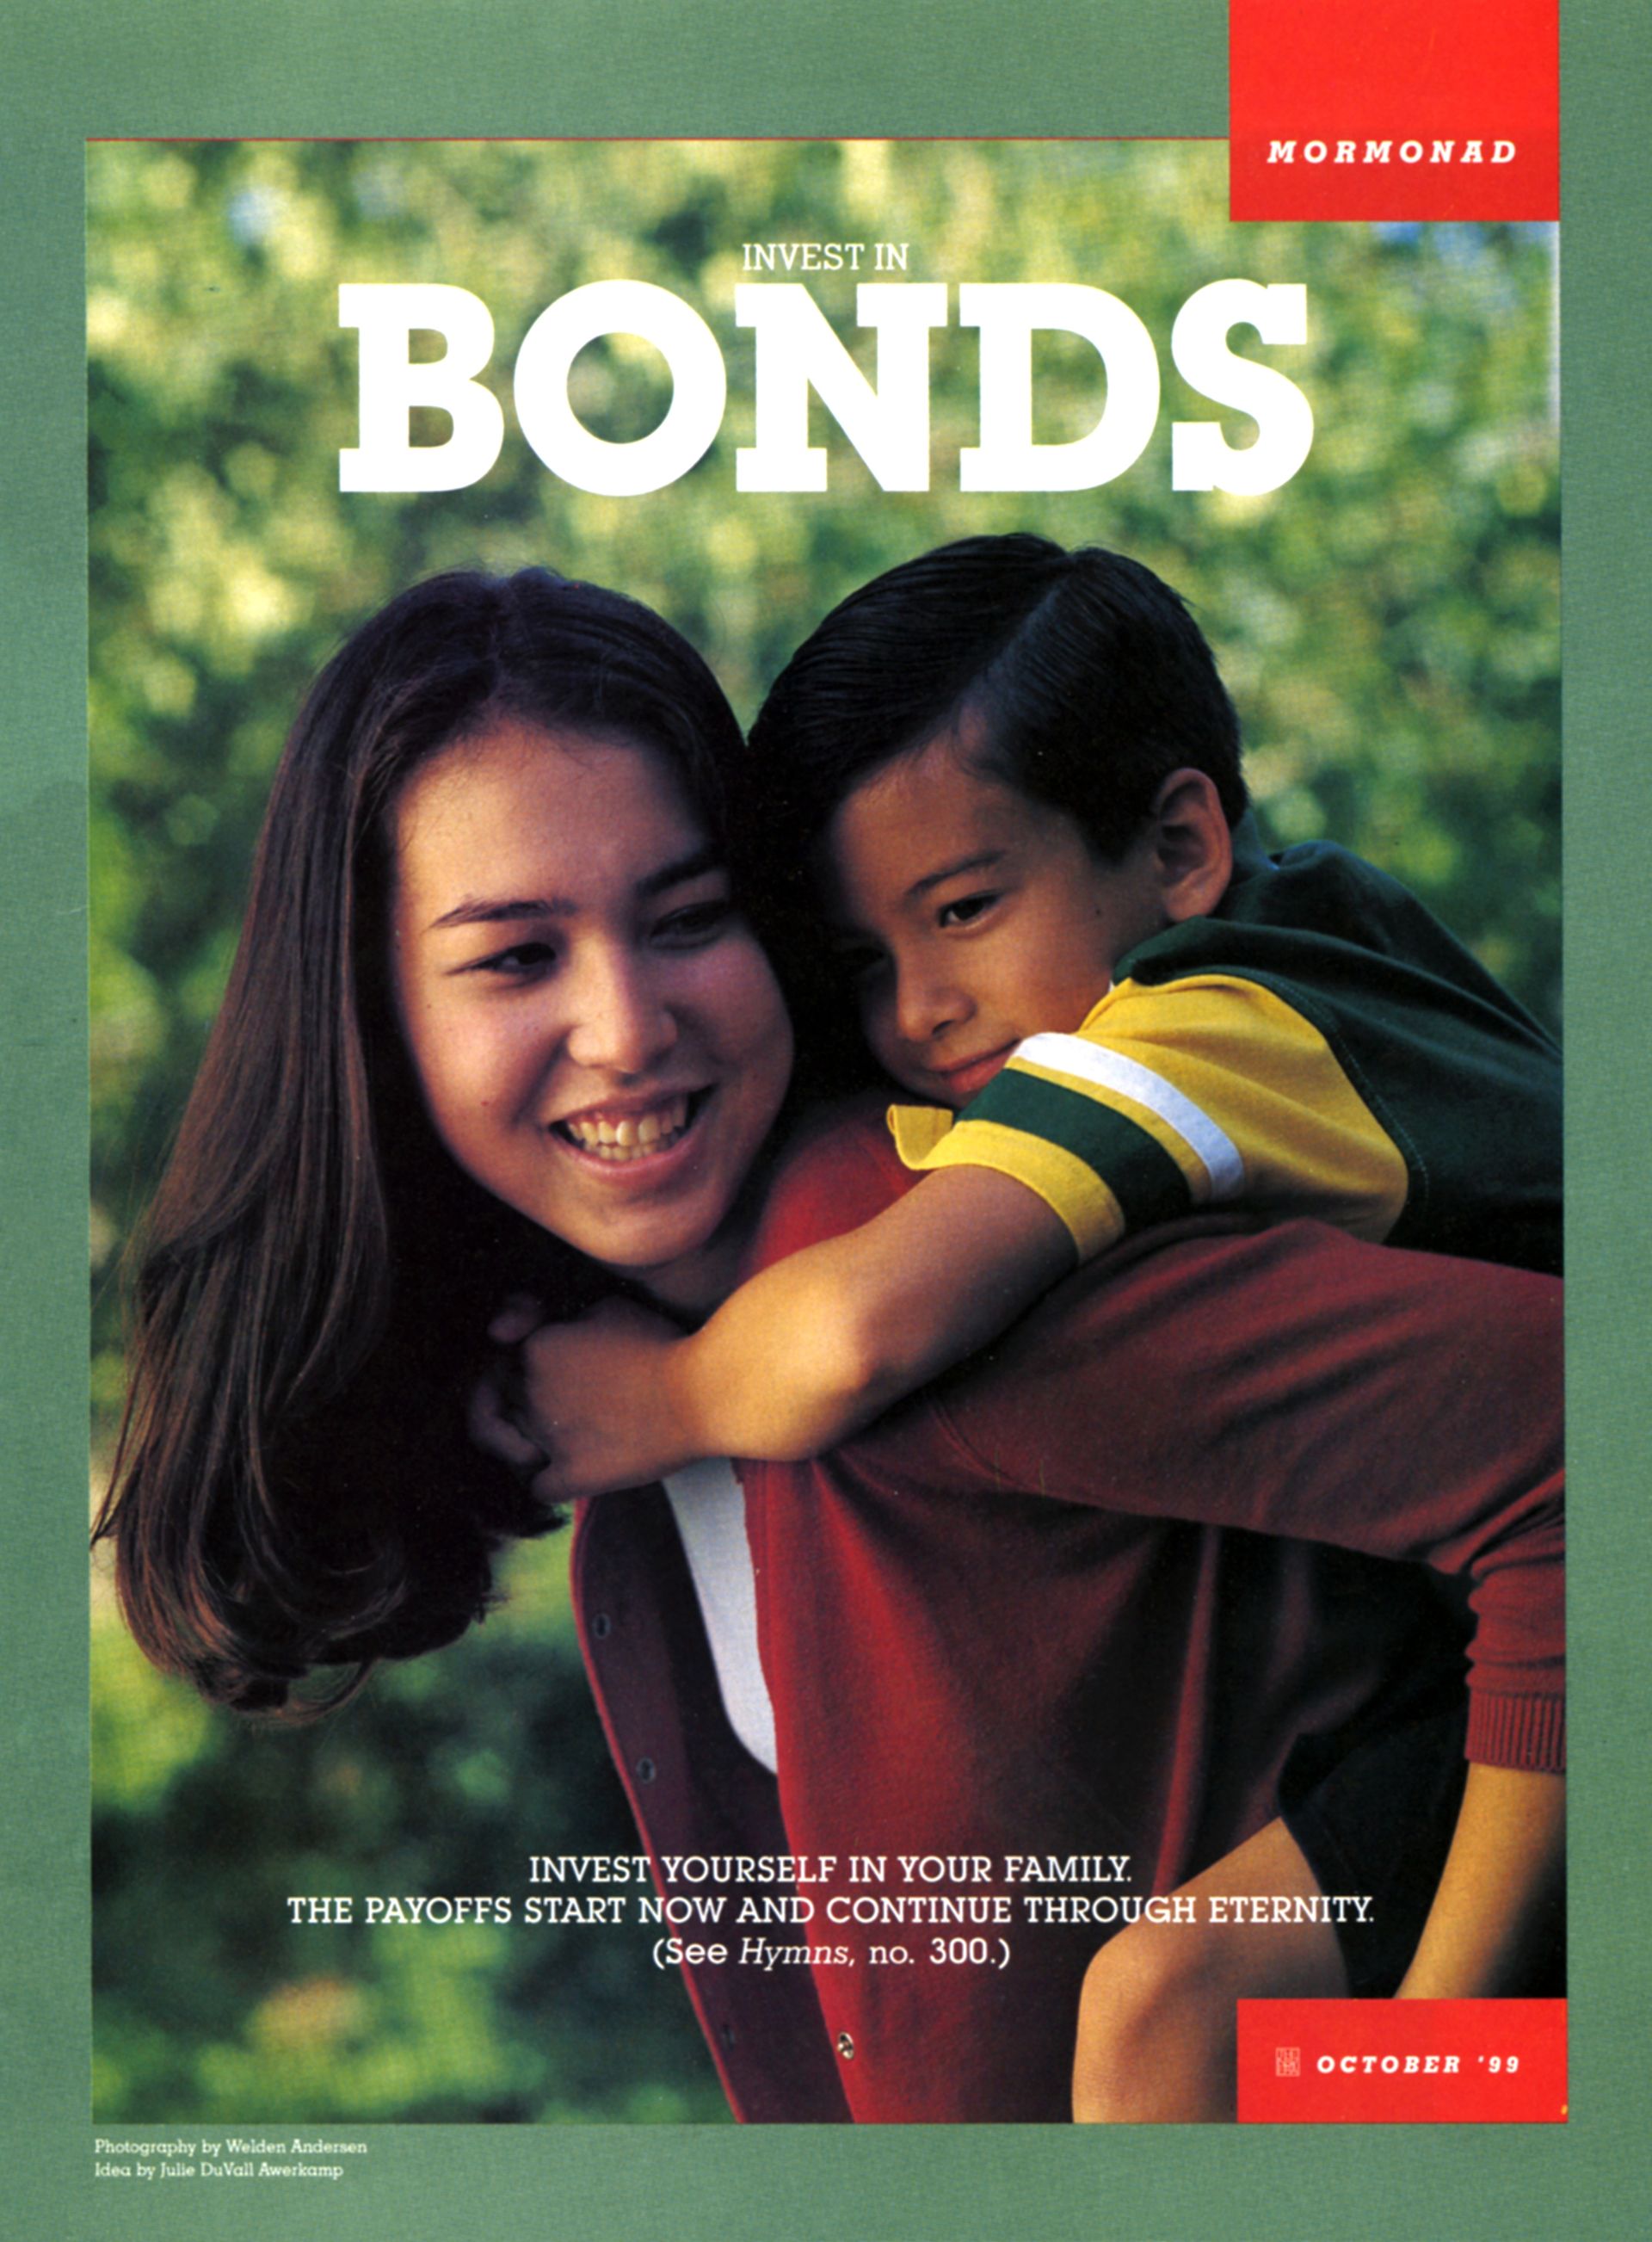 Invest in Bonds. Invest yourself in your family. The payoffs start now and continue through eternity. (See Hymns, no. 300.) Oct. 1999